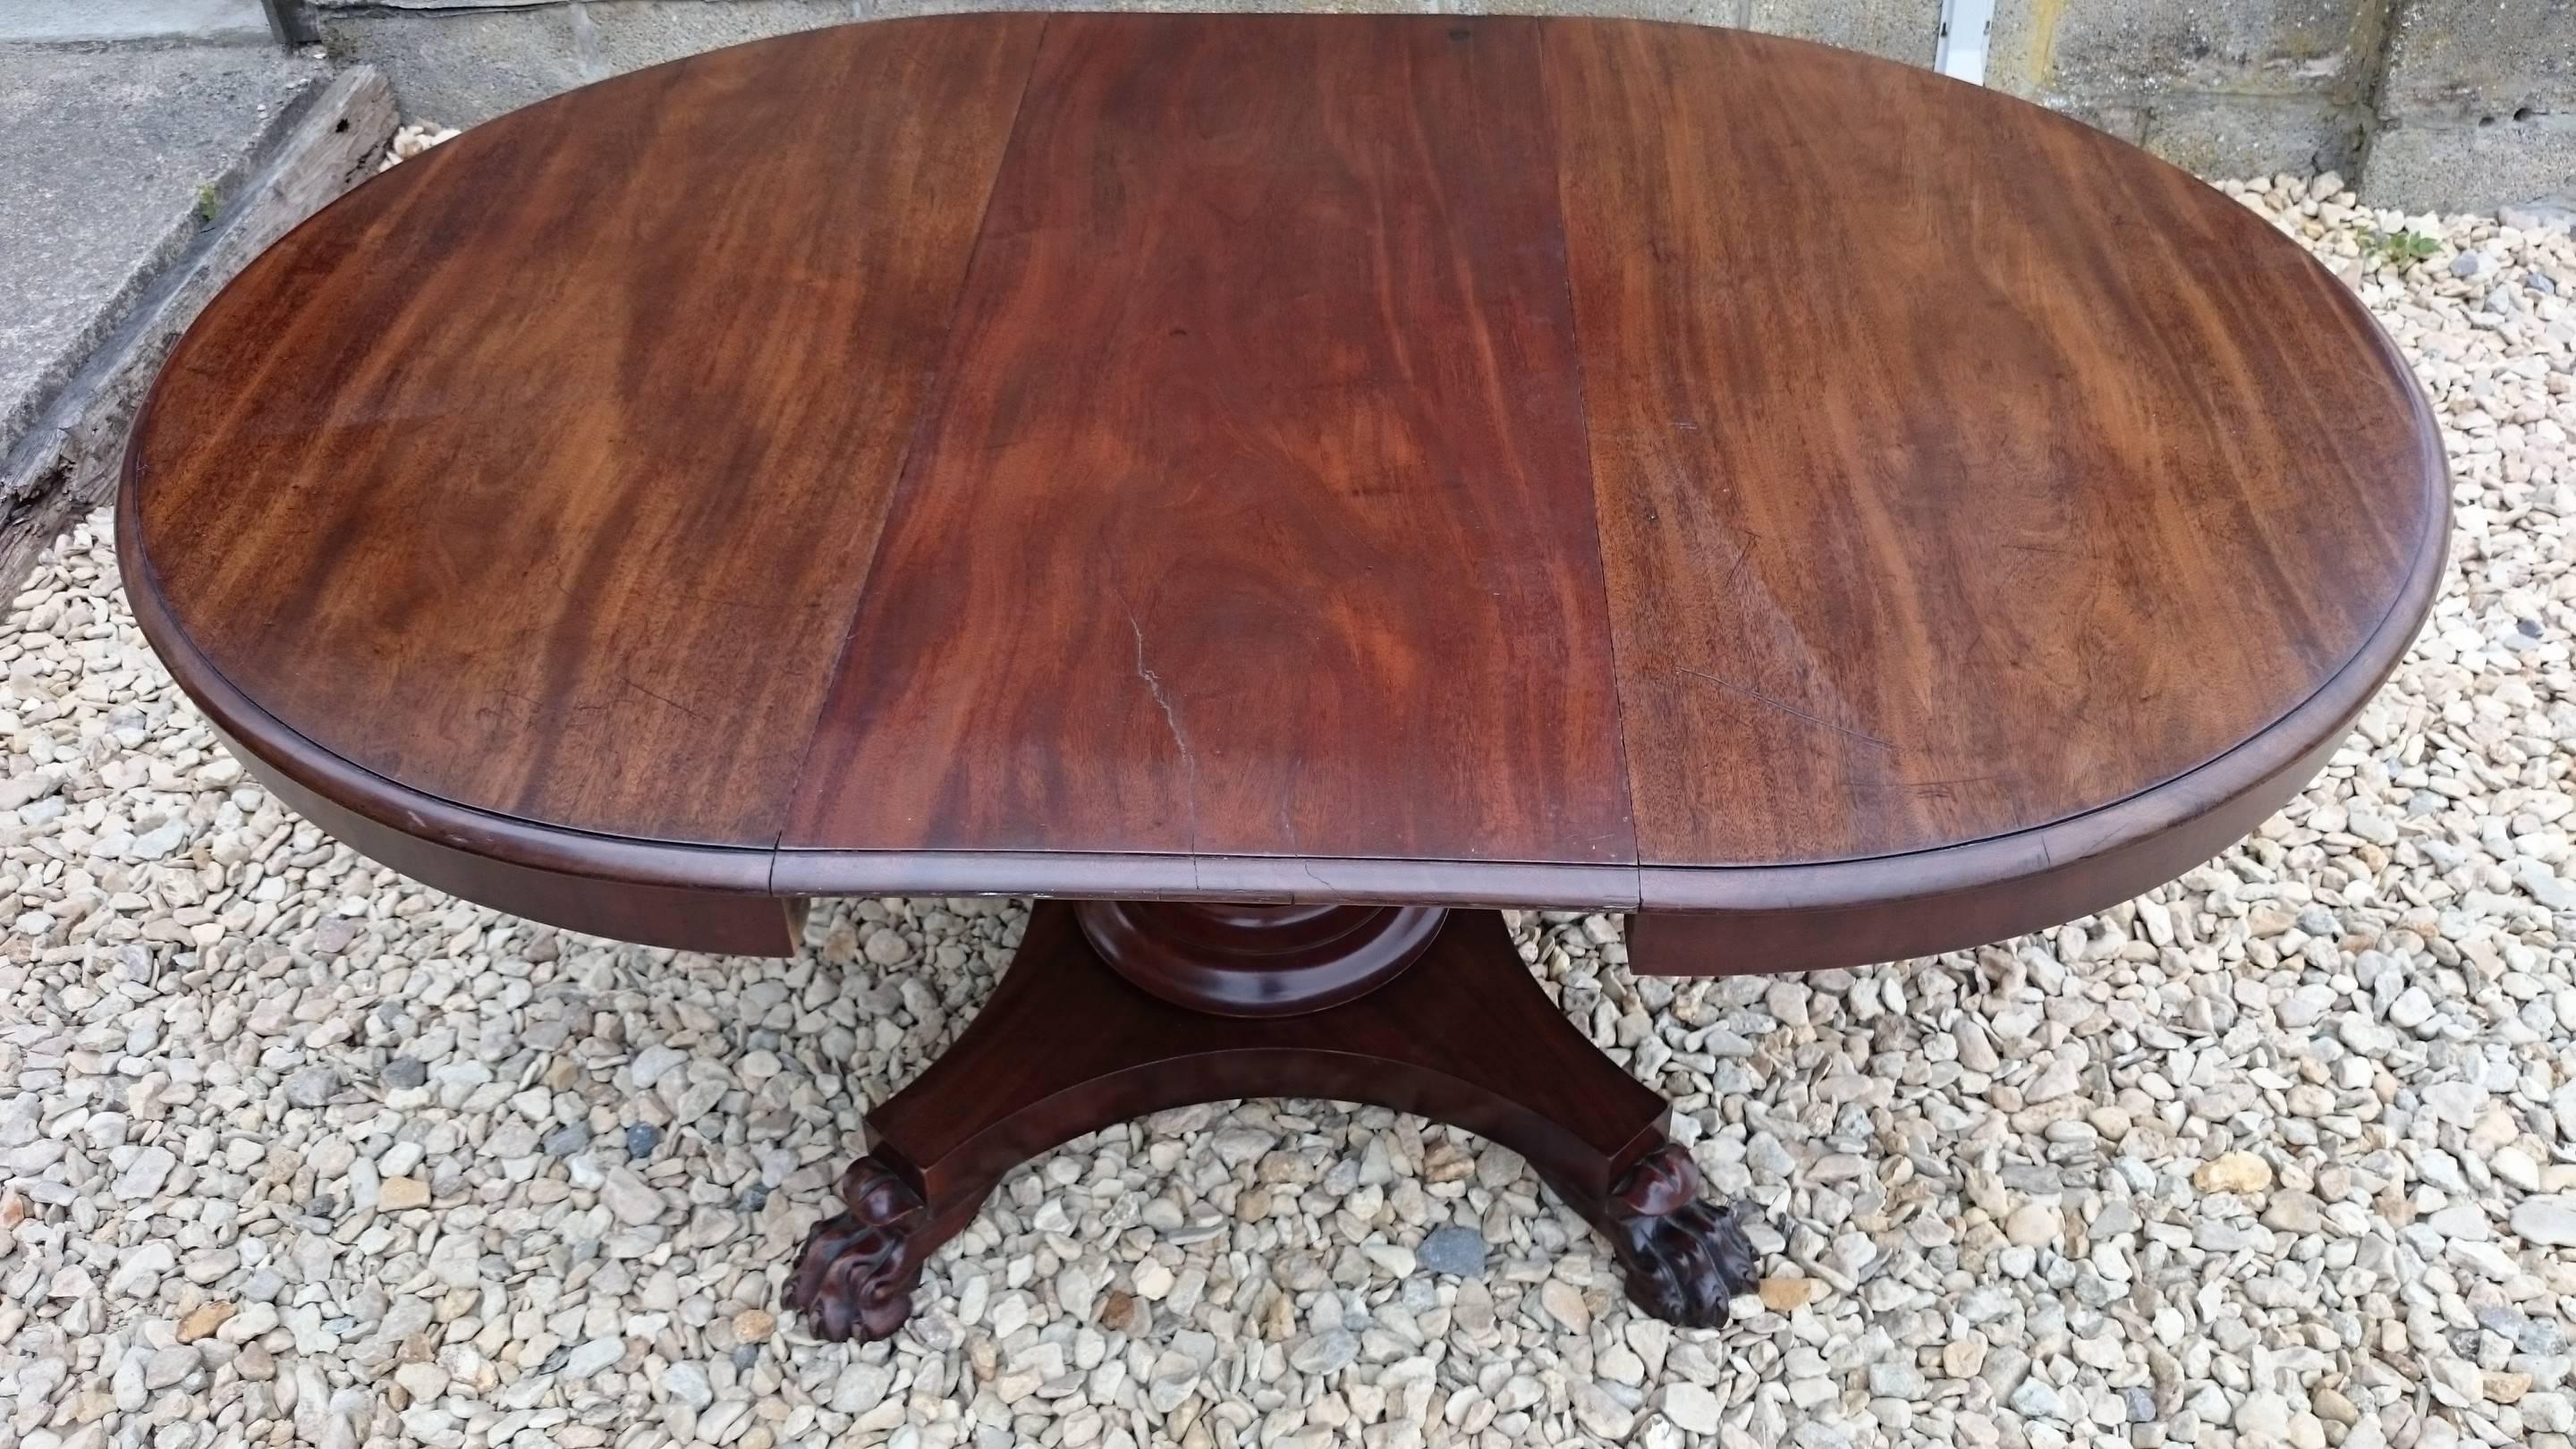 Antique extending breakfast table with removable leaf to fold down to a circle. Good solid and versatile table with lots of leg room. 

English, circa 1840 

Measures: 48